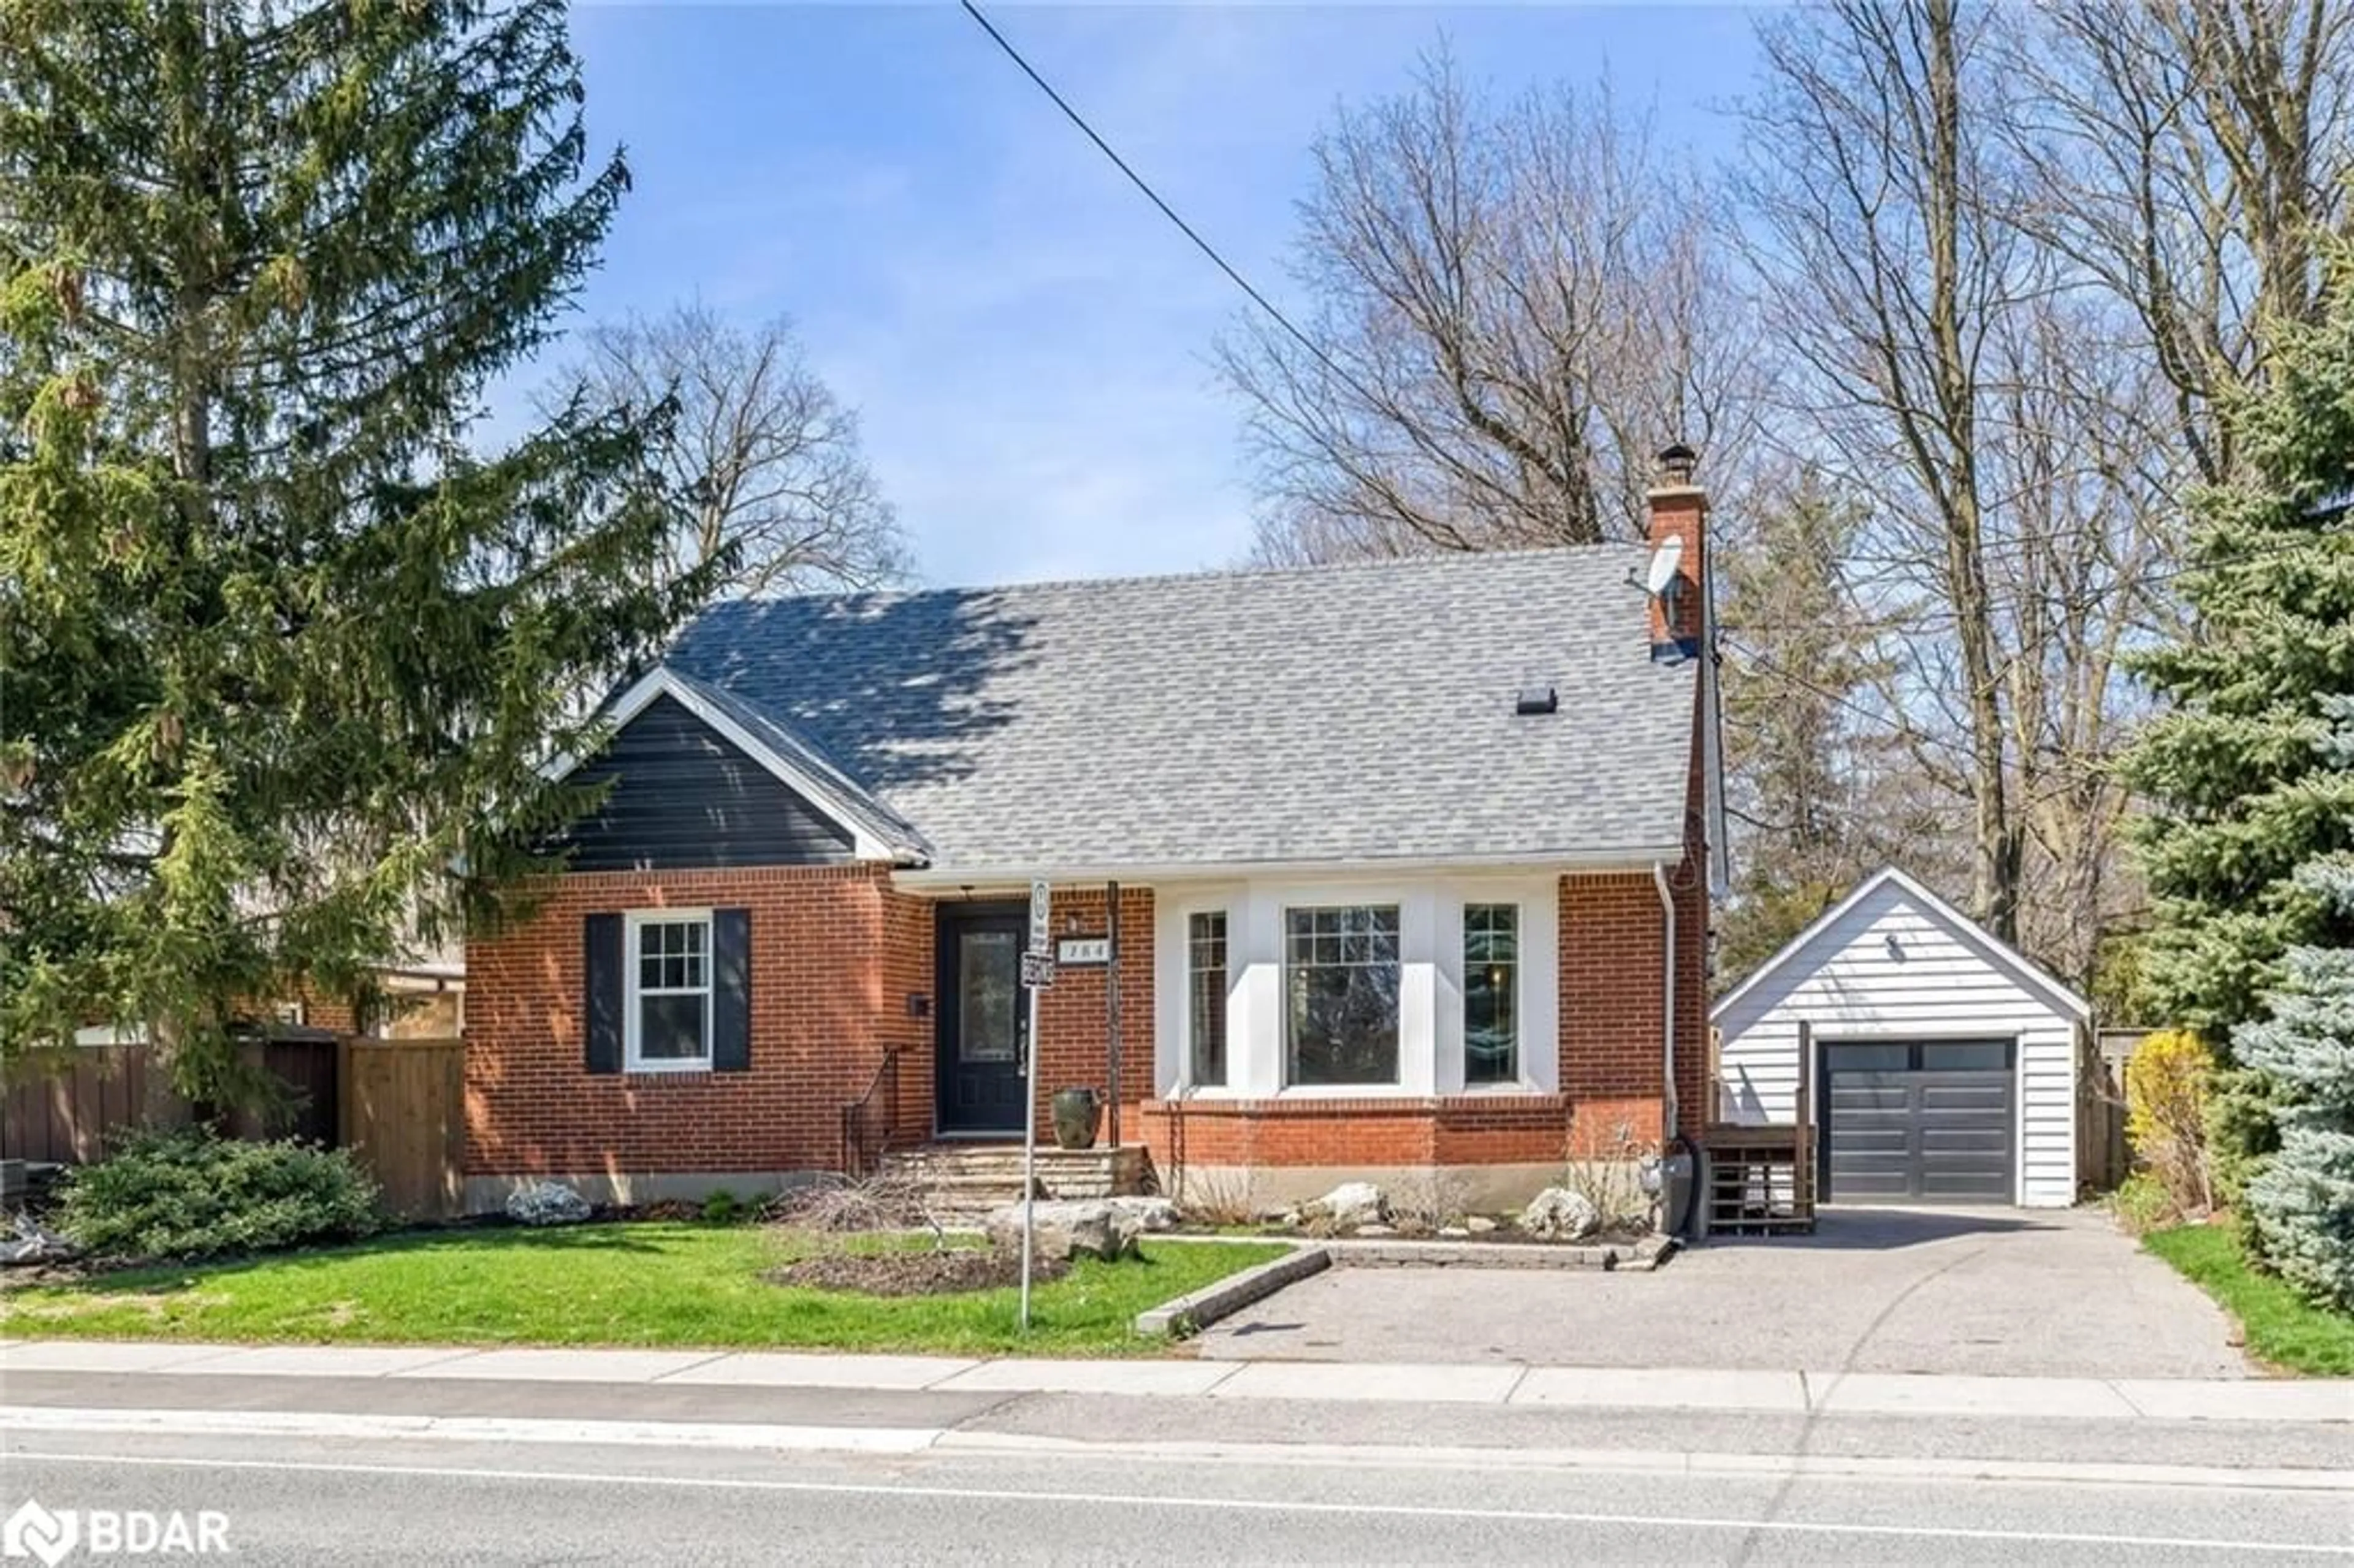 Home with brick exterior material for 284 Maple Ave, Georgetown Ontario L7G 1W7